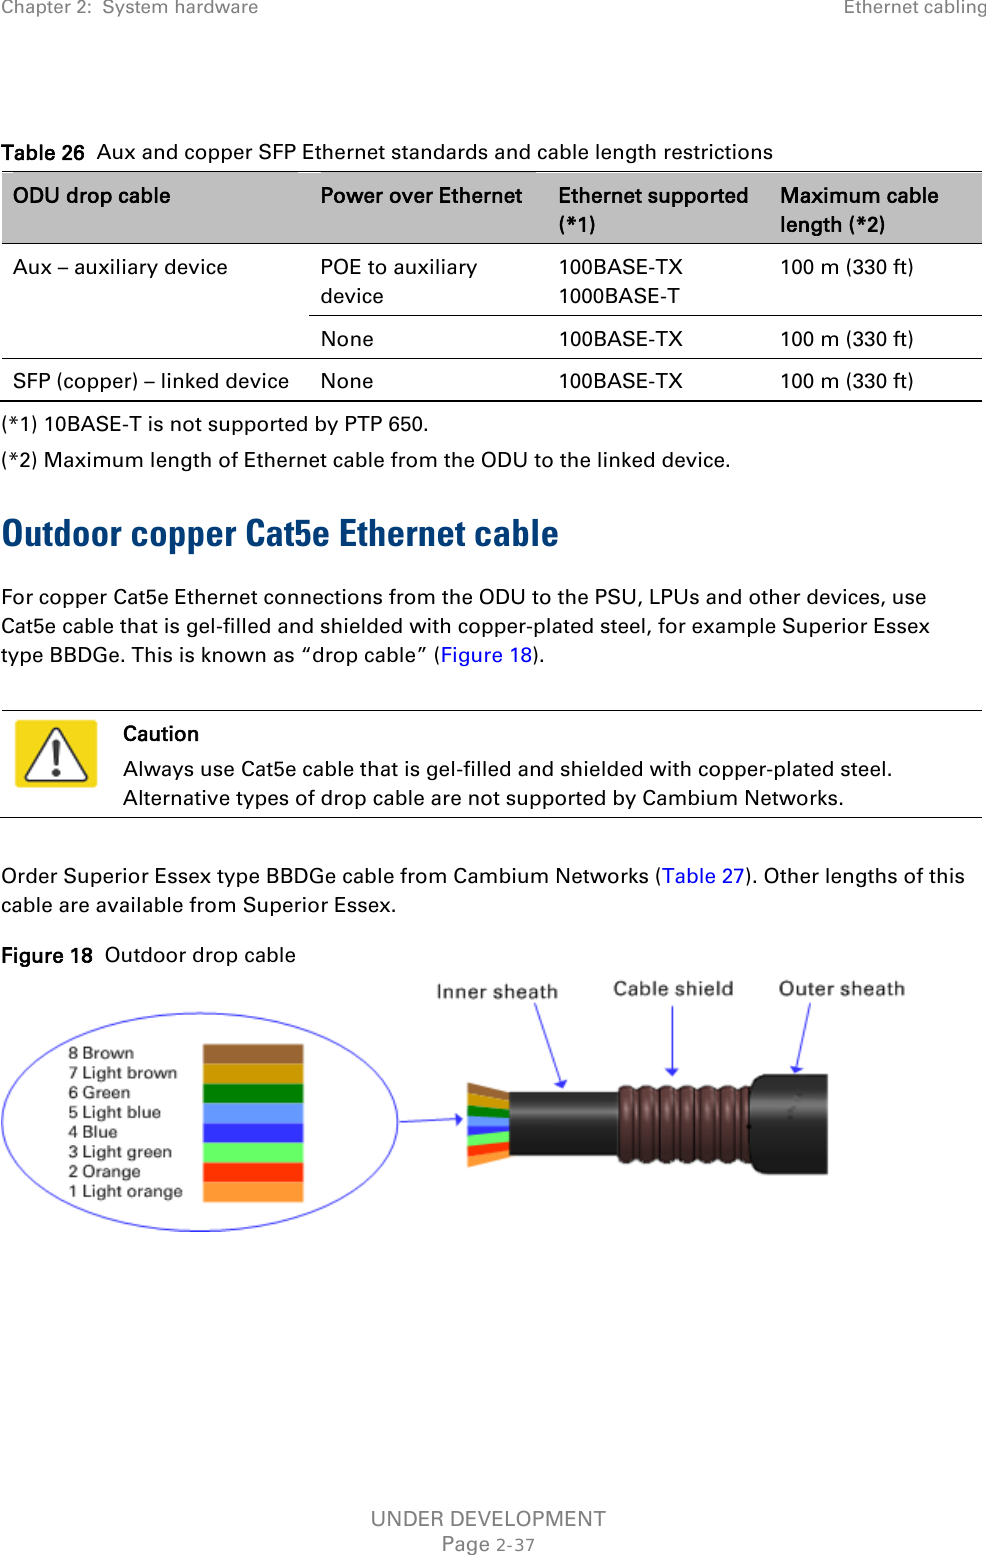 Chapter 2:  System hardware Ethernet cabling   Table 26  Aux and copper SFP Ethernet standards and cable length restrictions ODU drop cable Power over Ethernet Ethernet supported (*1) Maximum cable length (*2) Aux – auxiliary device  POE to auxiliary device 100BASE-TX 1000BASE-T 100 m (330 ft) None 100BASE-TX 100 m (330 ft) SFP (copper) – linked device None 100BASE-TX 100 m (330 ft) (*1) 10BASE-T is not supported by PTP 650.  (*2) Maximum length of Ethernet cable from the ODU to the linked device. Outdoor copper Cat5e Ethernet cable For copper Cat5e Ethernet connections from the ODU to the PSU, LPUs and other devices, use Cat5e cable that is gel-filled and shielded with copper-plated steel, for example Superior Essex  type BBDGe. This is known as “drop cable” (Figure 18).   Caution Always use Cat5e cable that is gel-filled and shielded with copper-plated steel. Alternative types of drop cable are not supported by Cambium Networks.  Order Superior Essex type BBDGe cable from Cambium Networks (Table 27). Other lengths of this cable are available from Superior Essex. Figure 18  Outdoor drop cable     UNDER DEVELOPMENT Page 2-37 